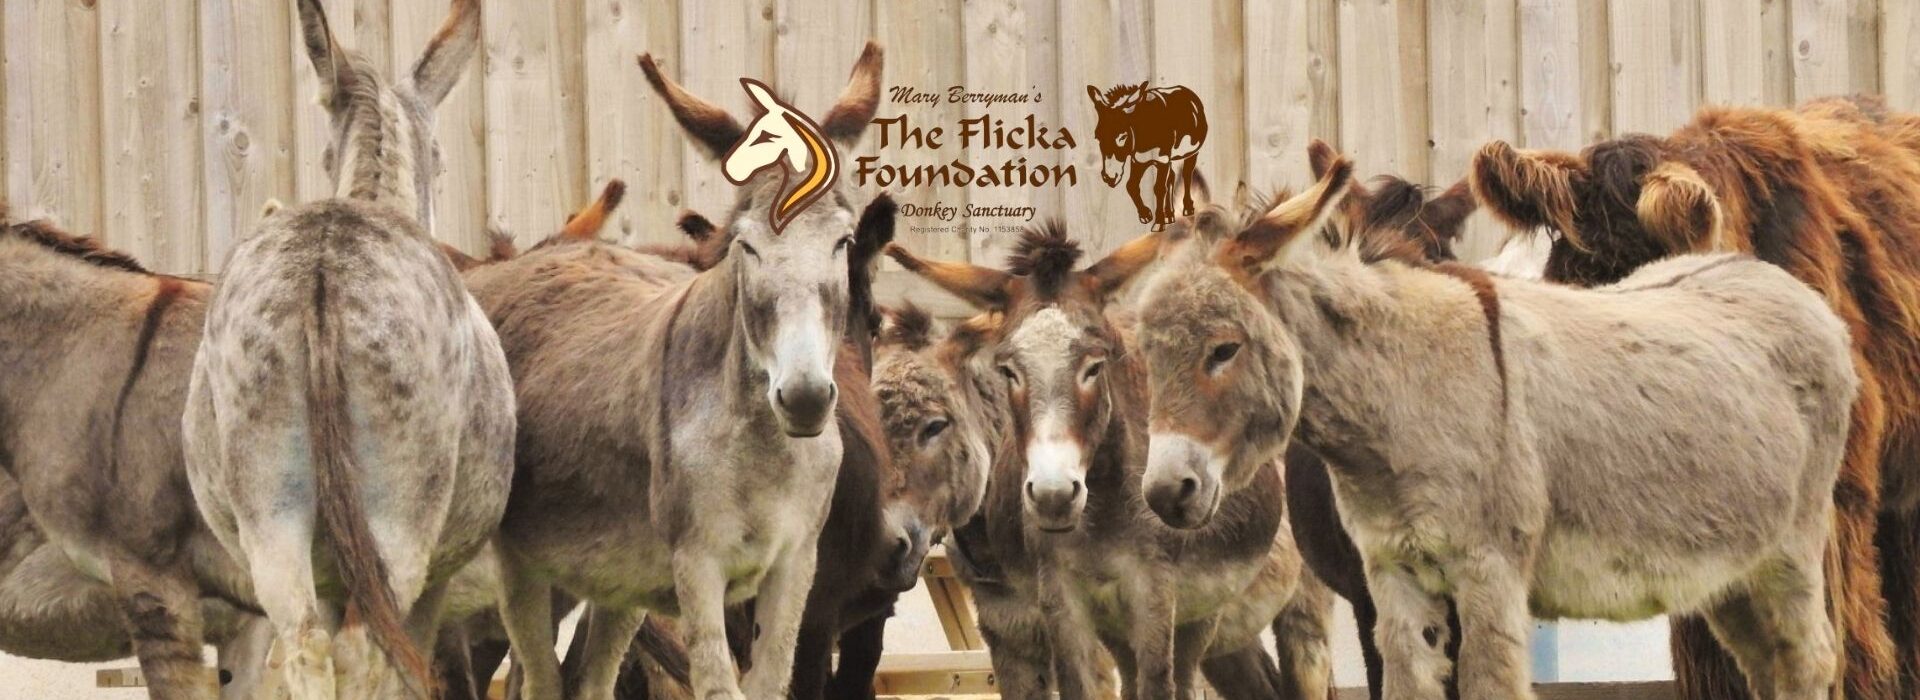 https://baileyscountrystore.co.uk/wp-content/uploads/2021/02/Copy-of-flicka-foundation-banner-2-1.jpg